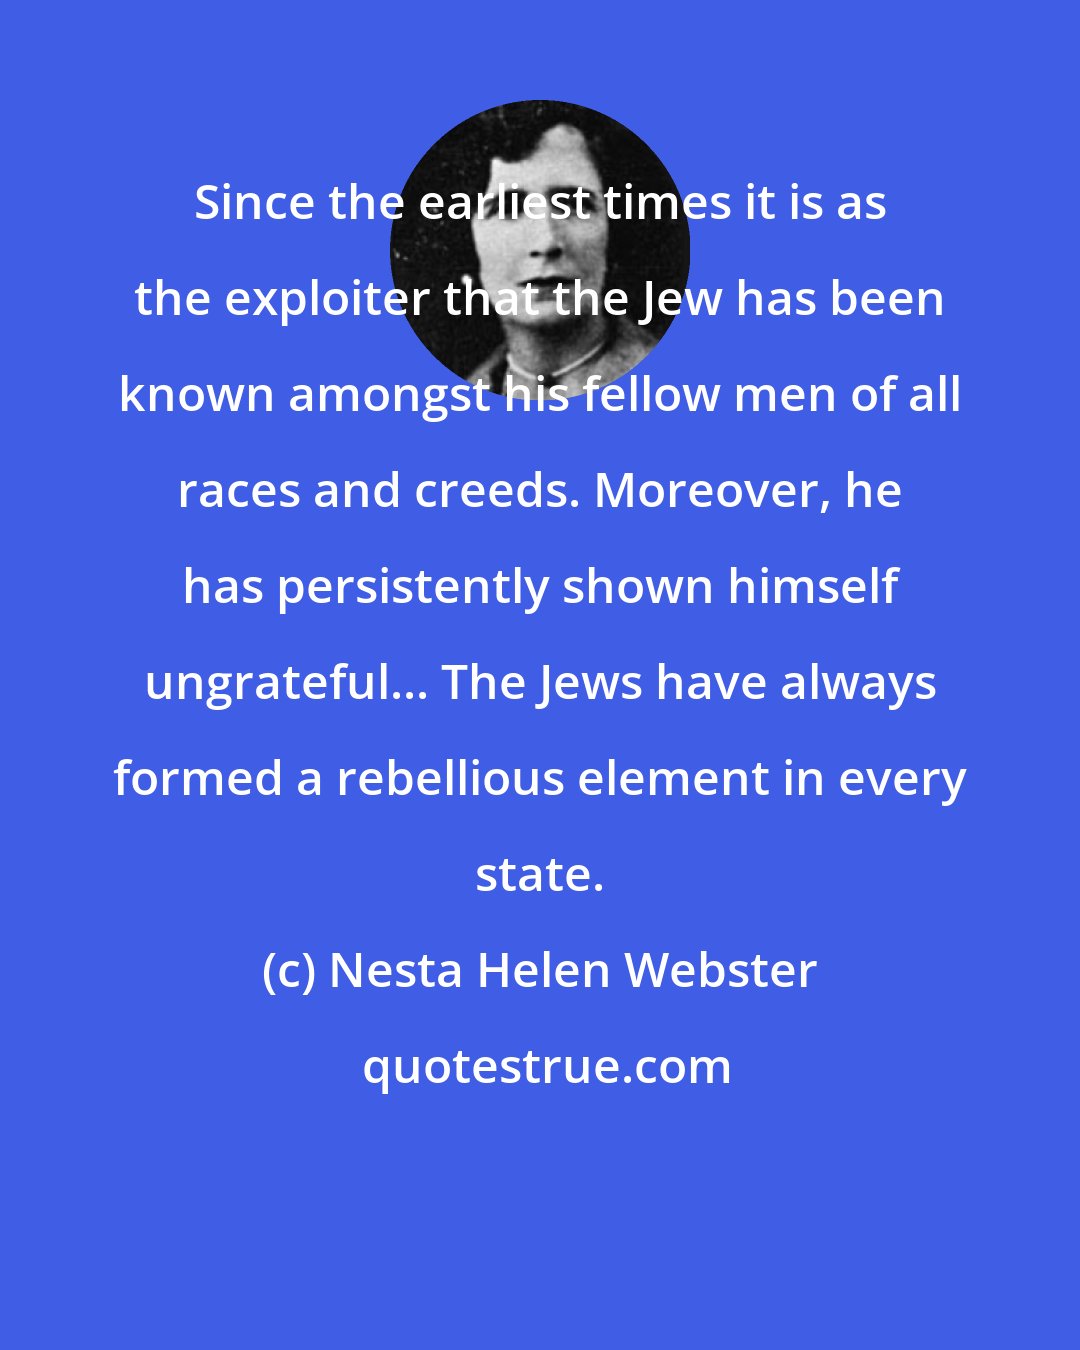 Nesta Helen Webster: Since the earliest times it is as the exploiter that the Jew has been known amongst his fellow men of all races and creeds. Moreover, he has persistently shown himself ungrateful... The Jews have always formed a rebellious element in every state.